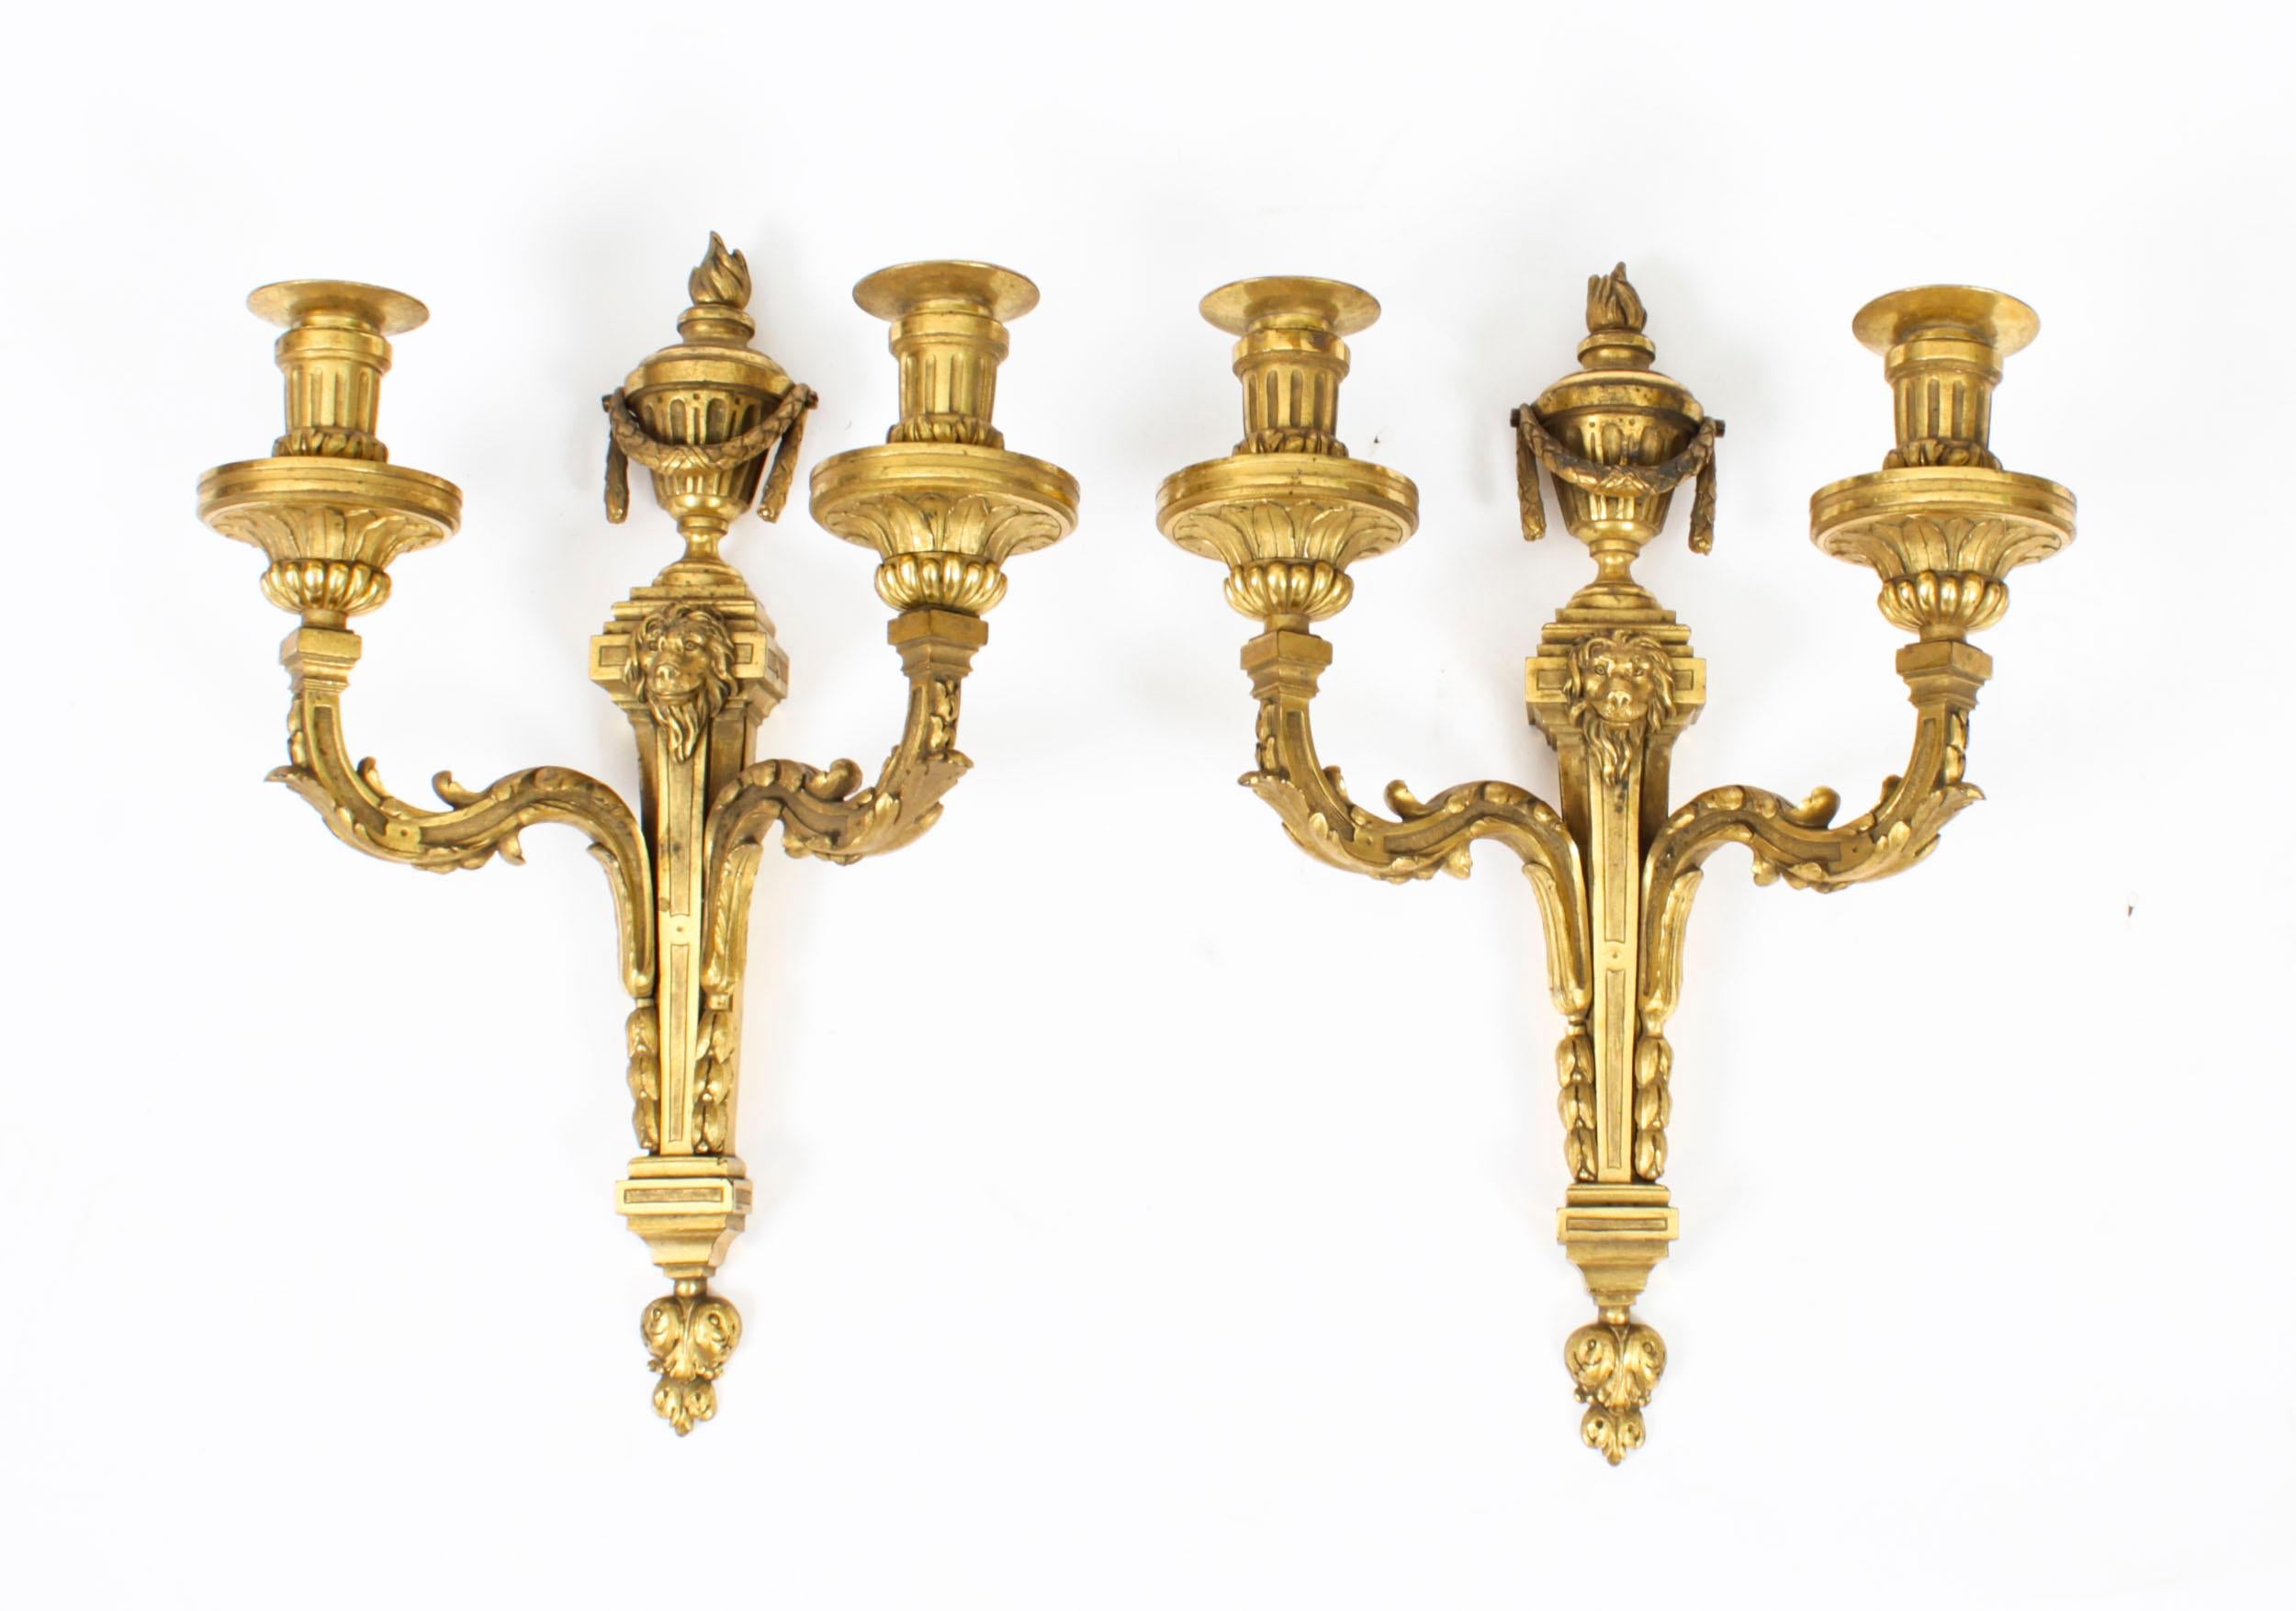 This is a fine pair of antique Regency Revival twin branch ormolu wall candle lights dating from Circa 1850.

The wall lights feature torch urn shaped tops above tapering bodies with lions mask mounts, each with acanthus leaf cast shaped branch arms